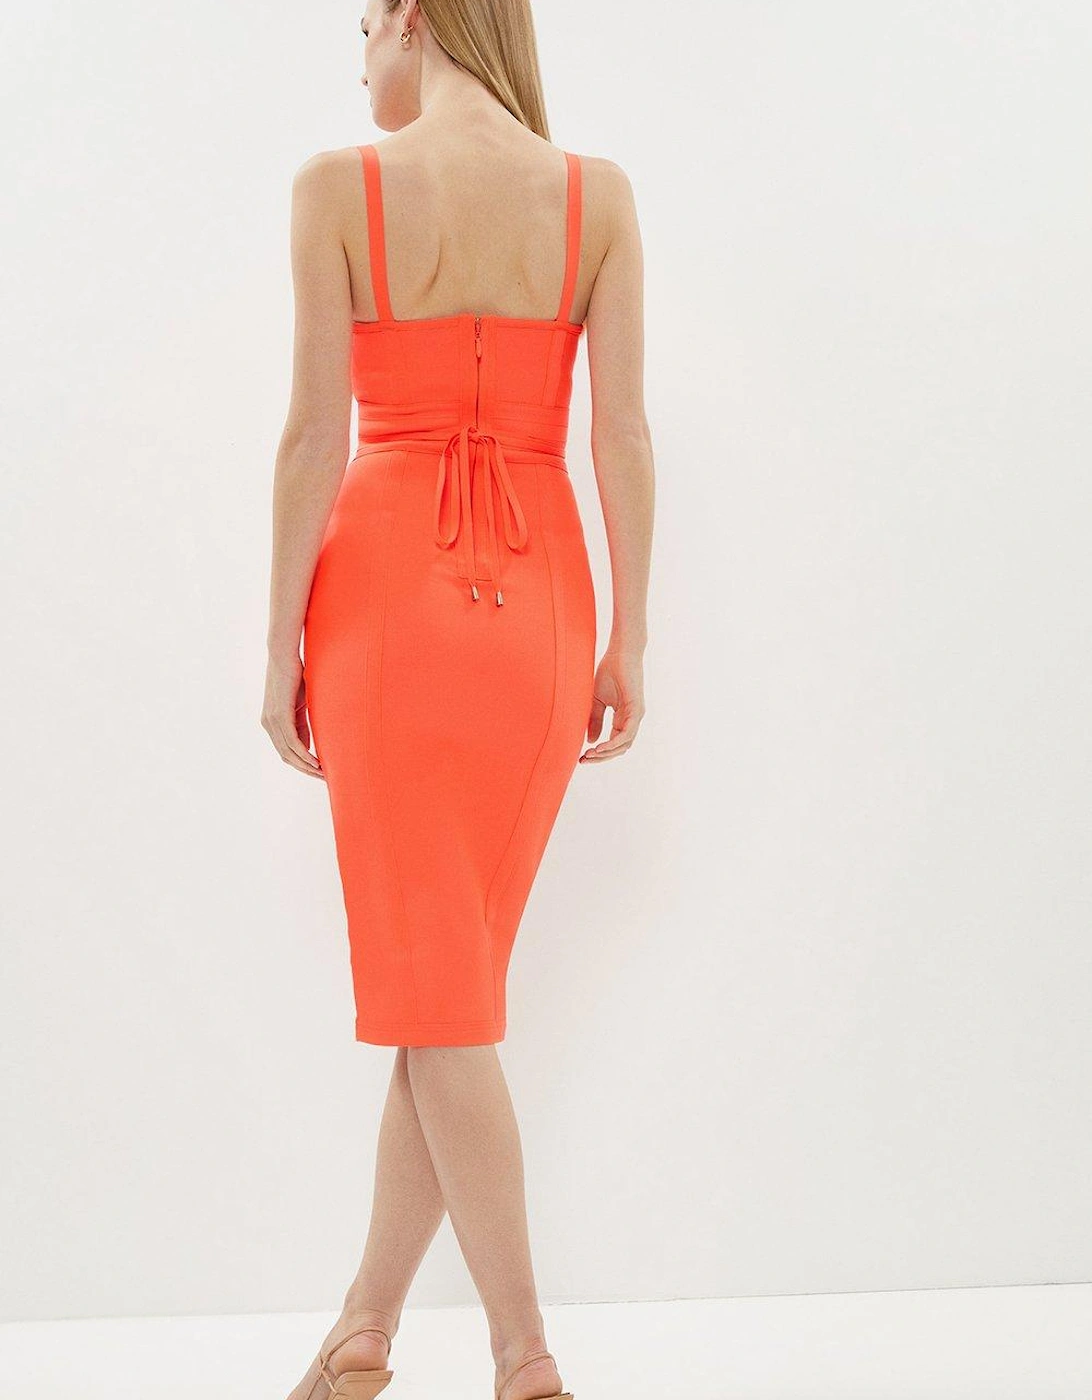 Sculpting Strappy Bandage Dress